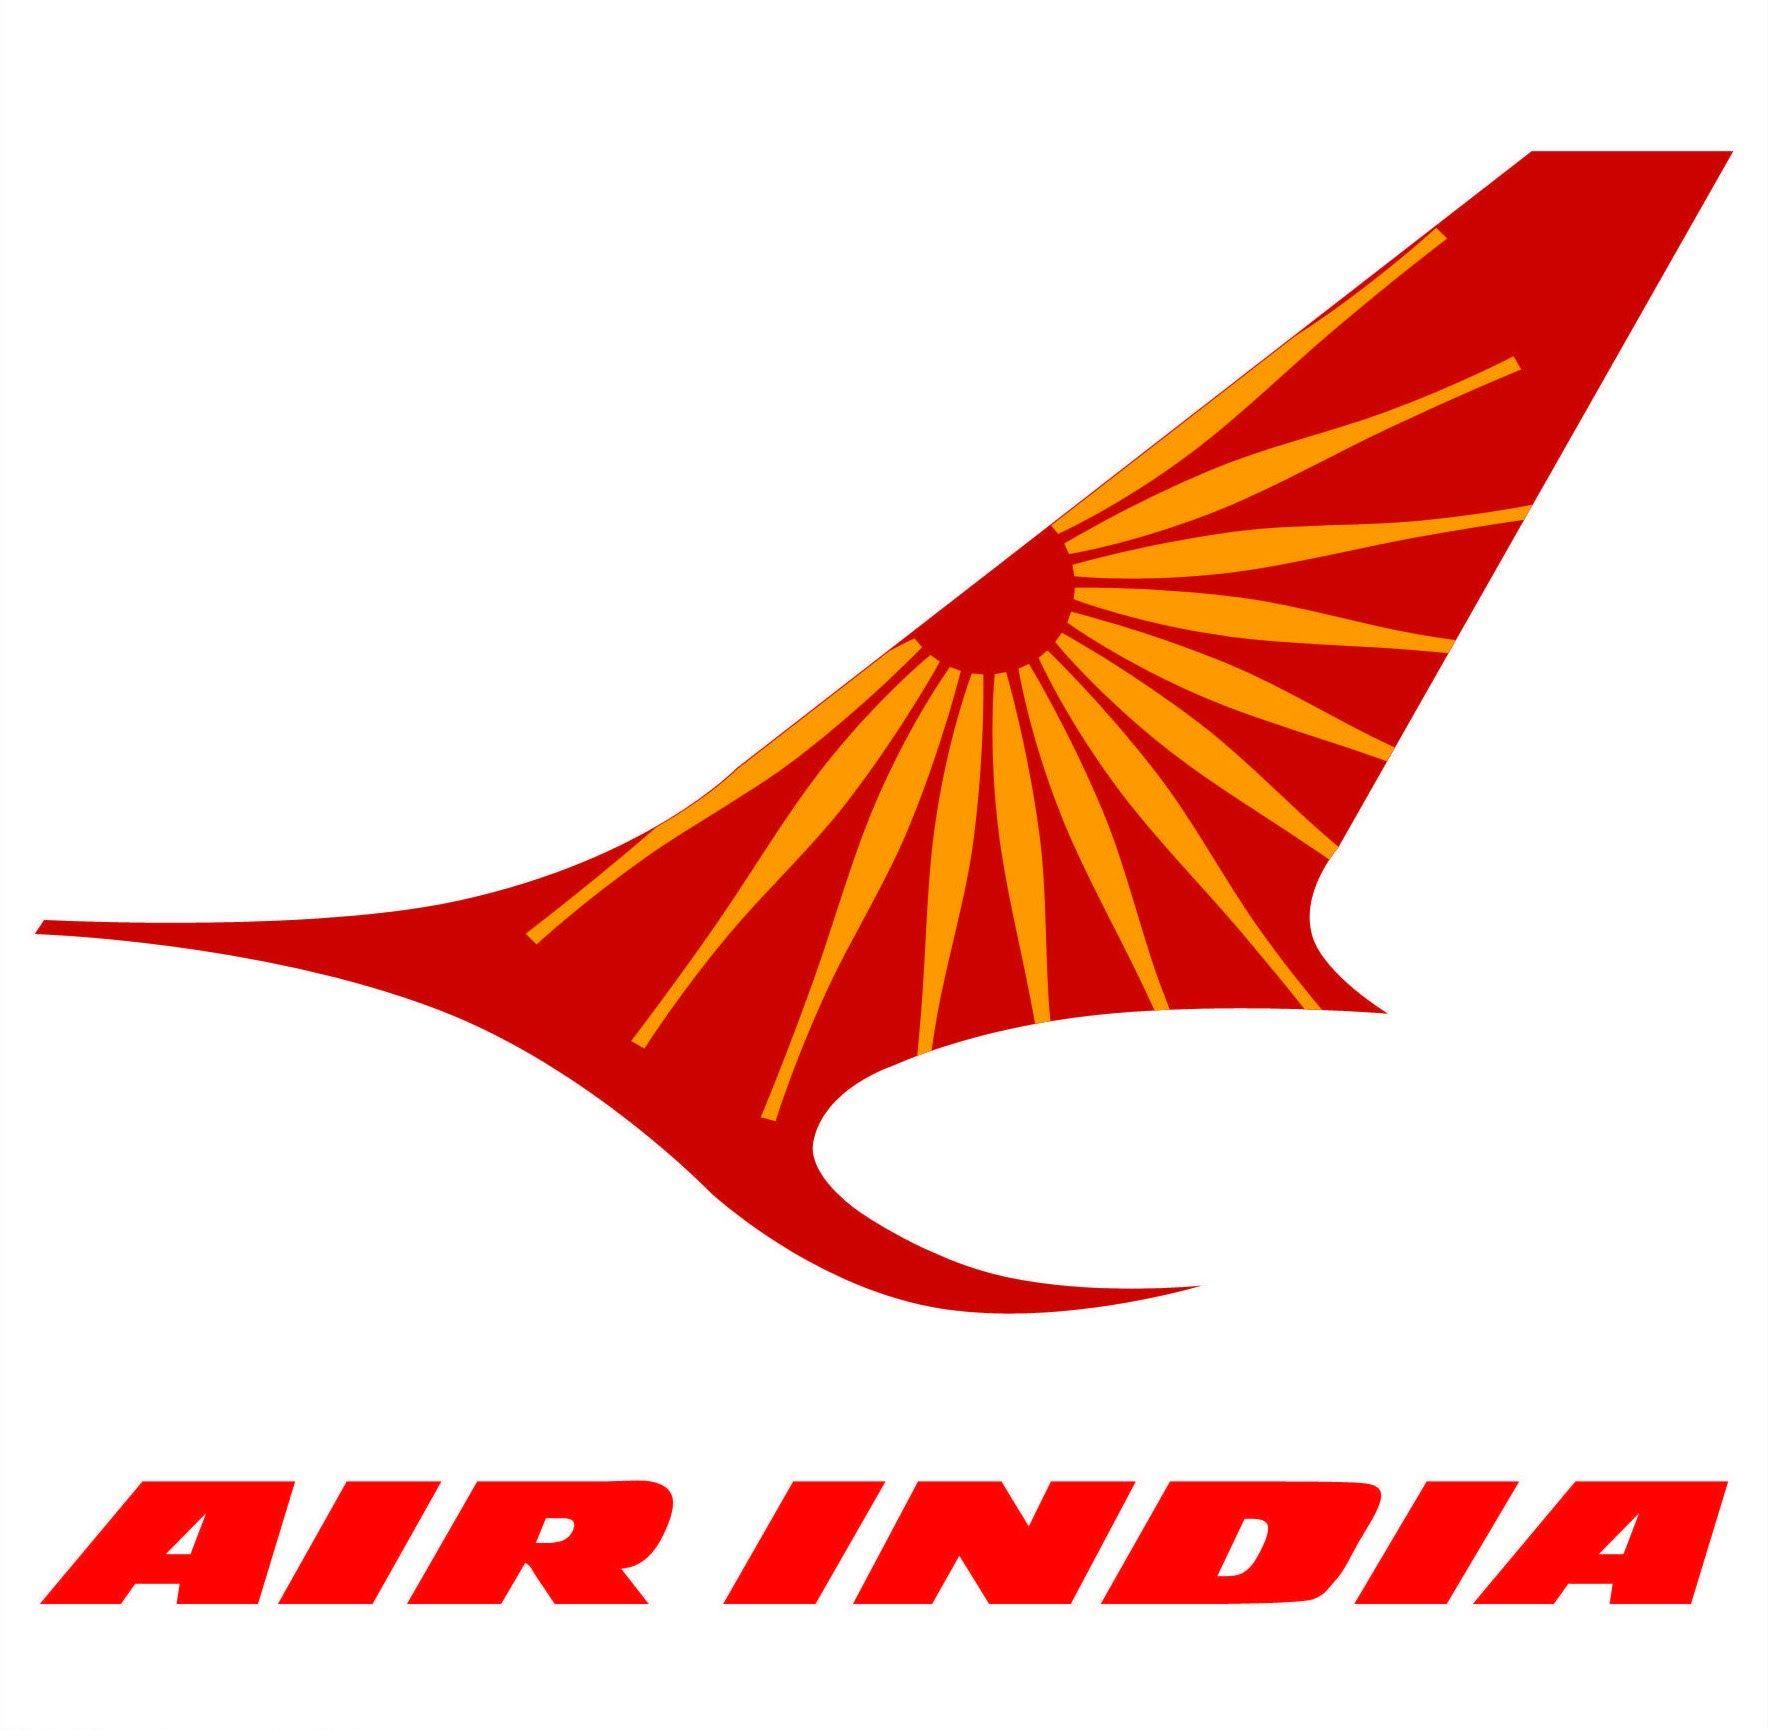 Airline Swan Logo - Air India Flight Booking Routes, Air India Airline Reviews